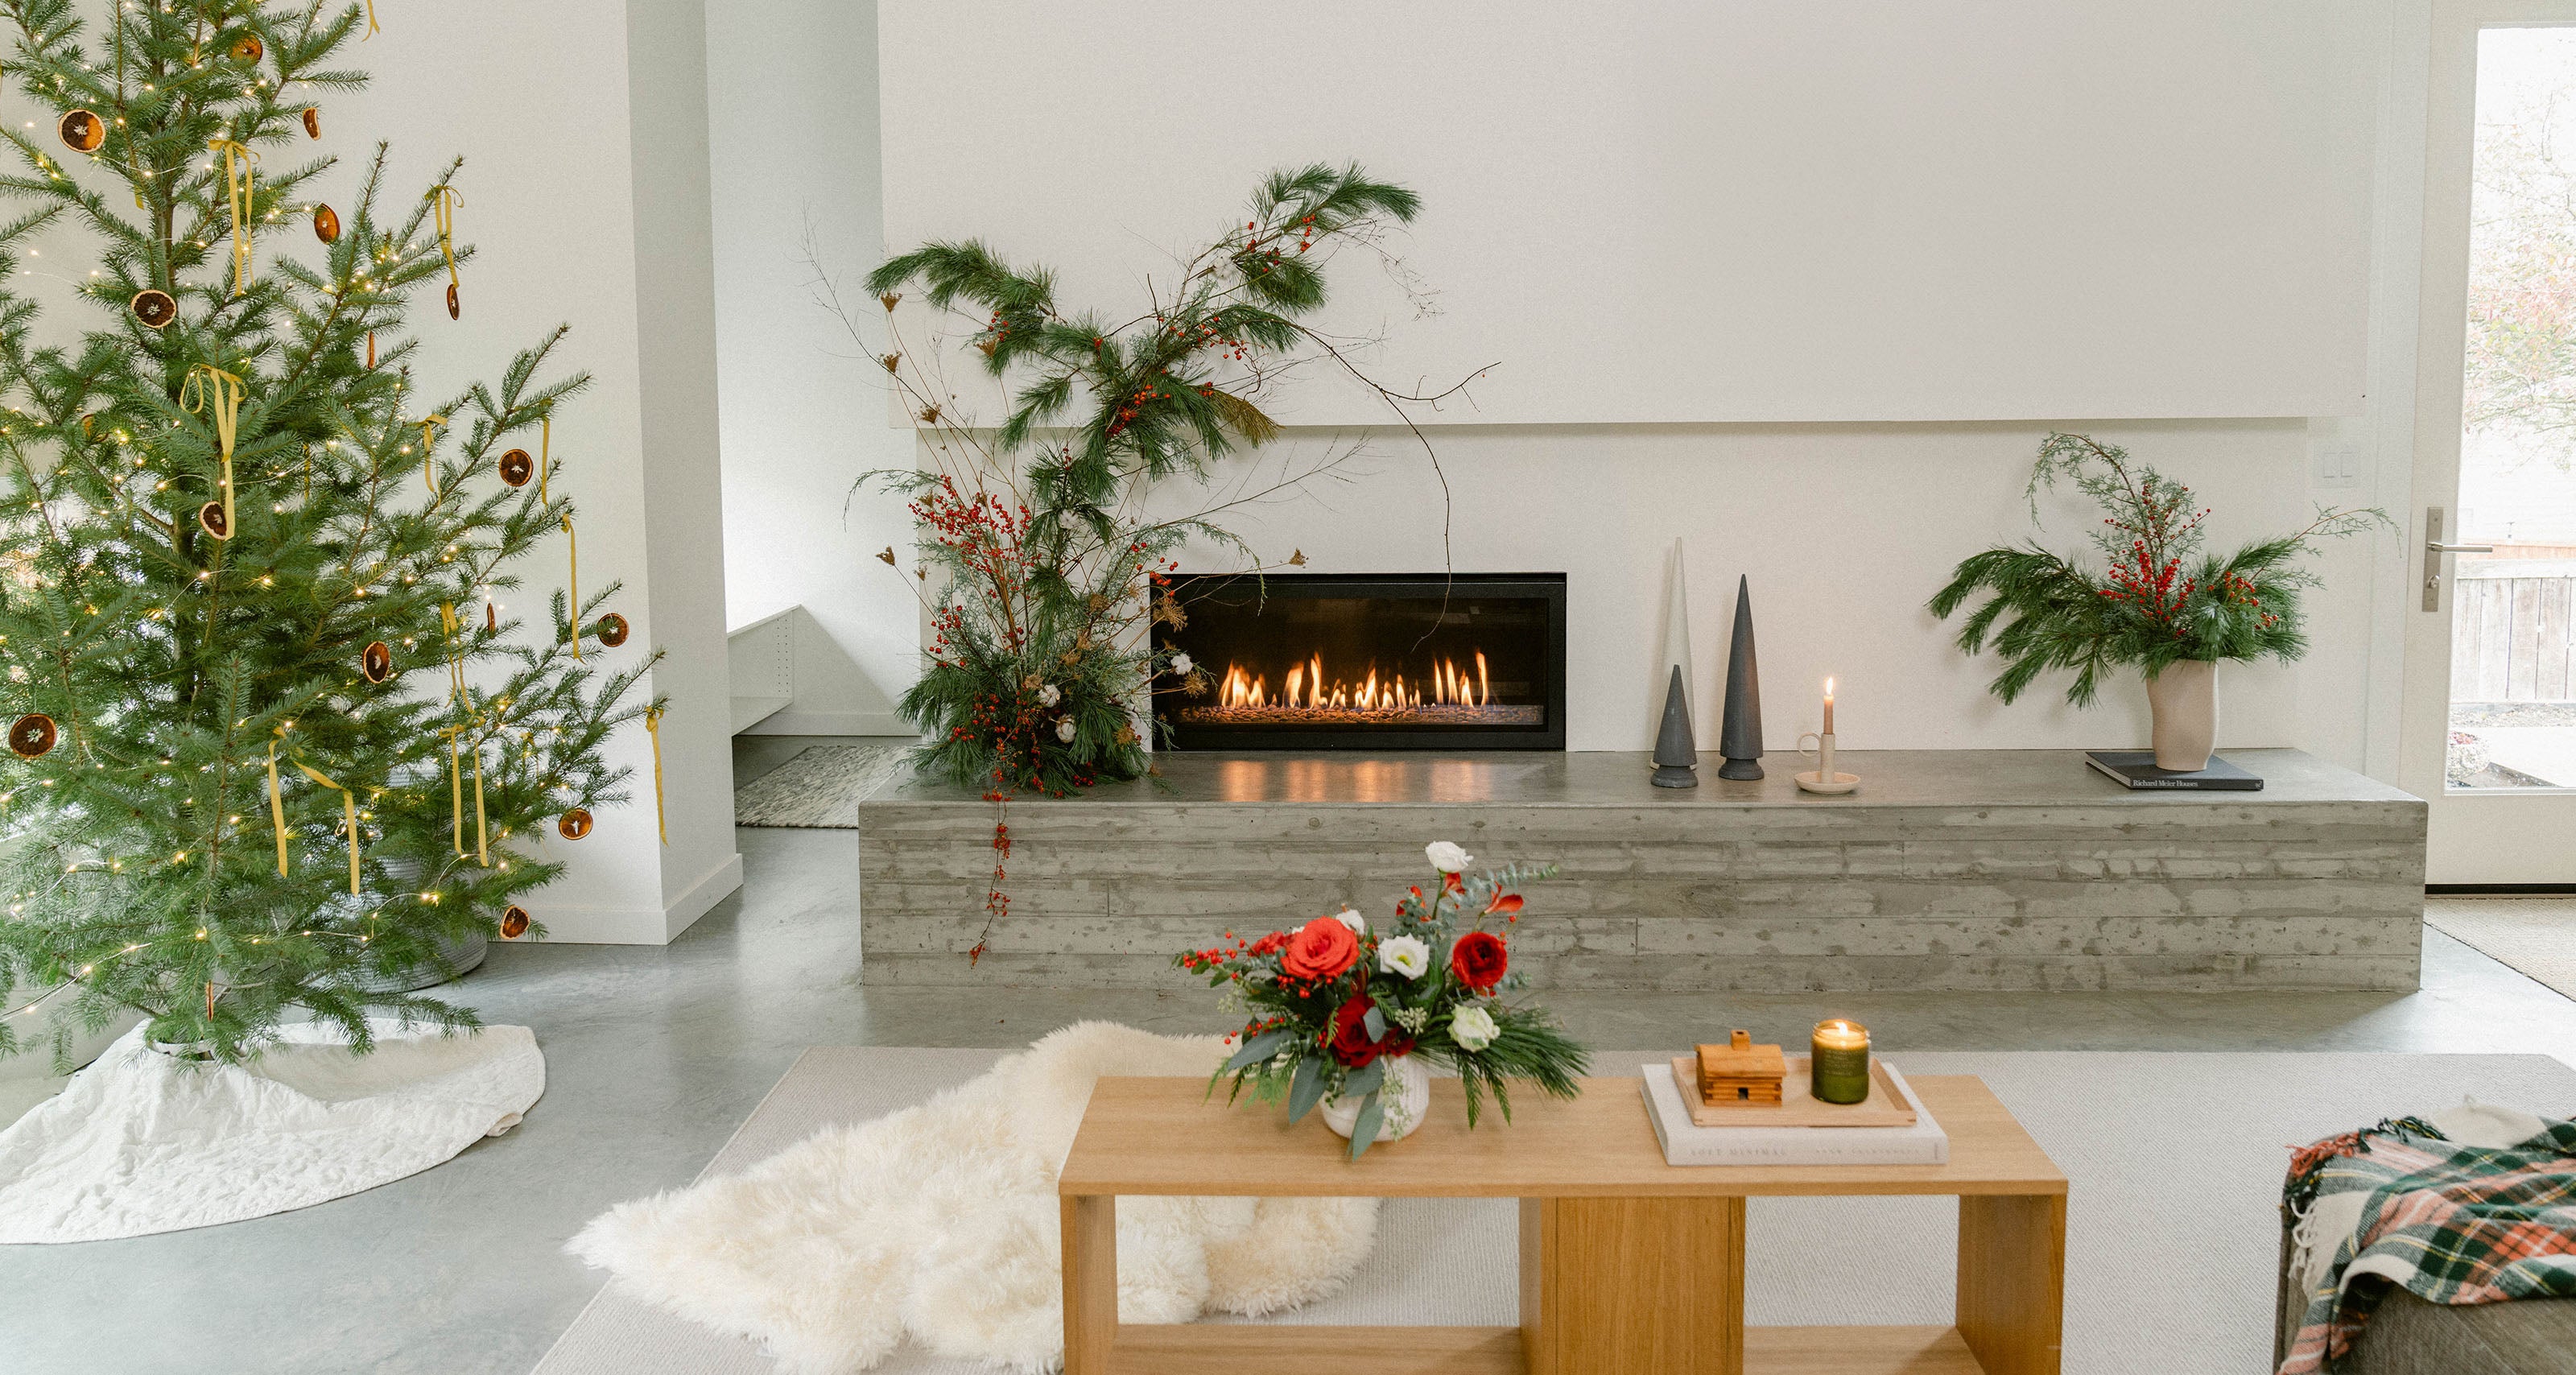 Hygge at Home: Embracing the Danish Art of Cozy Living in Winter